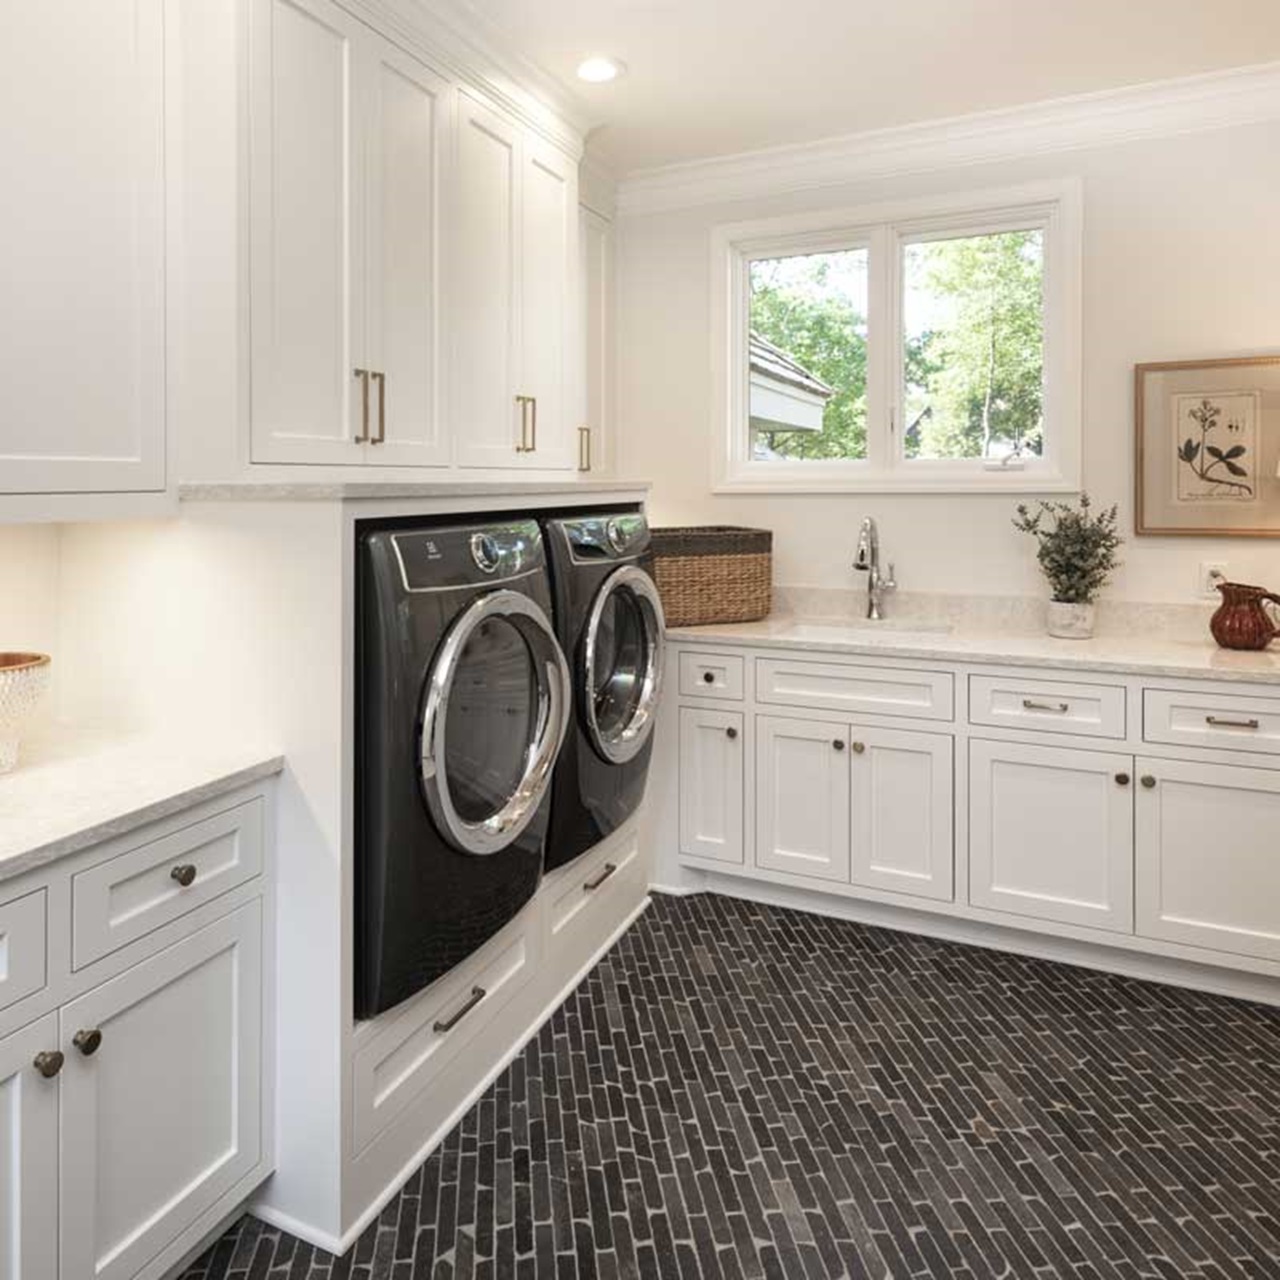 Laundry room with white cabinets and casement windows